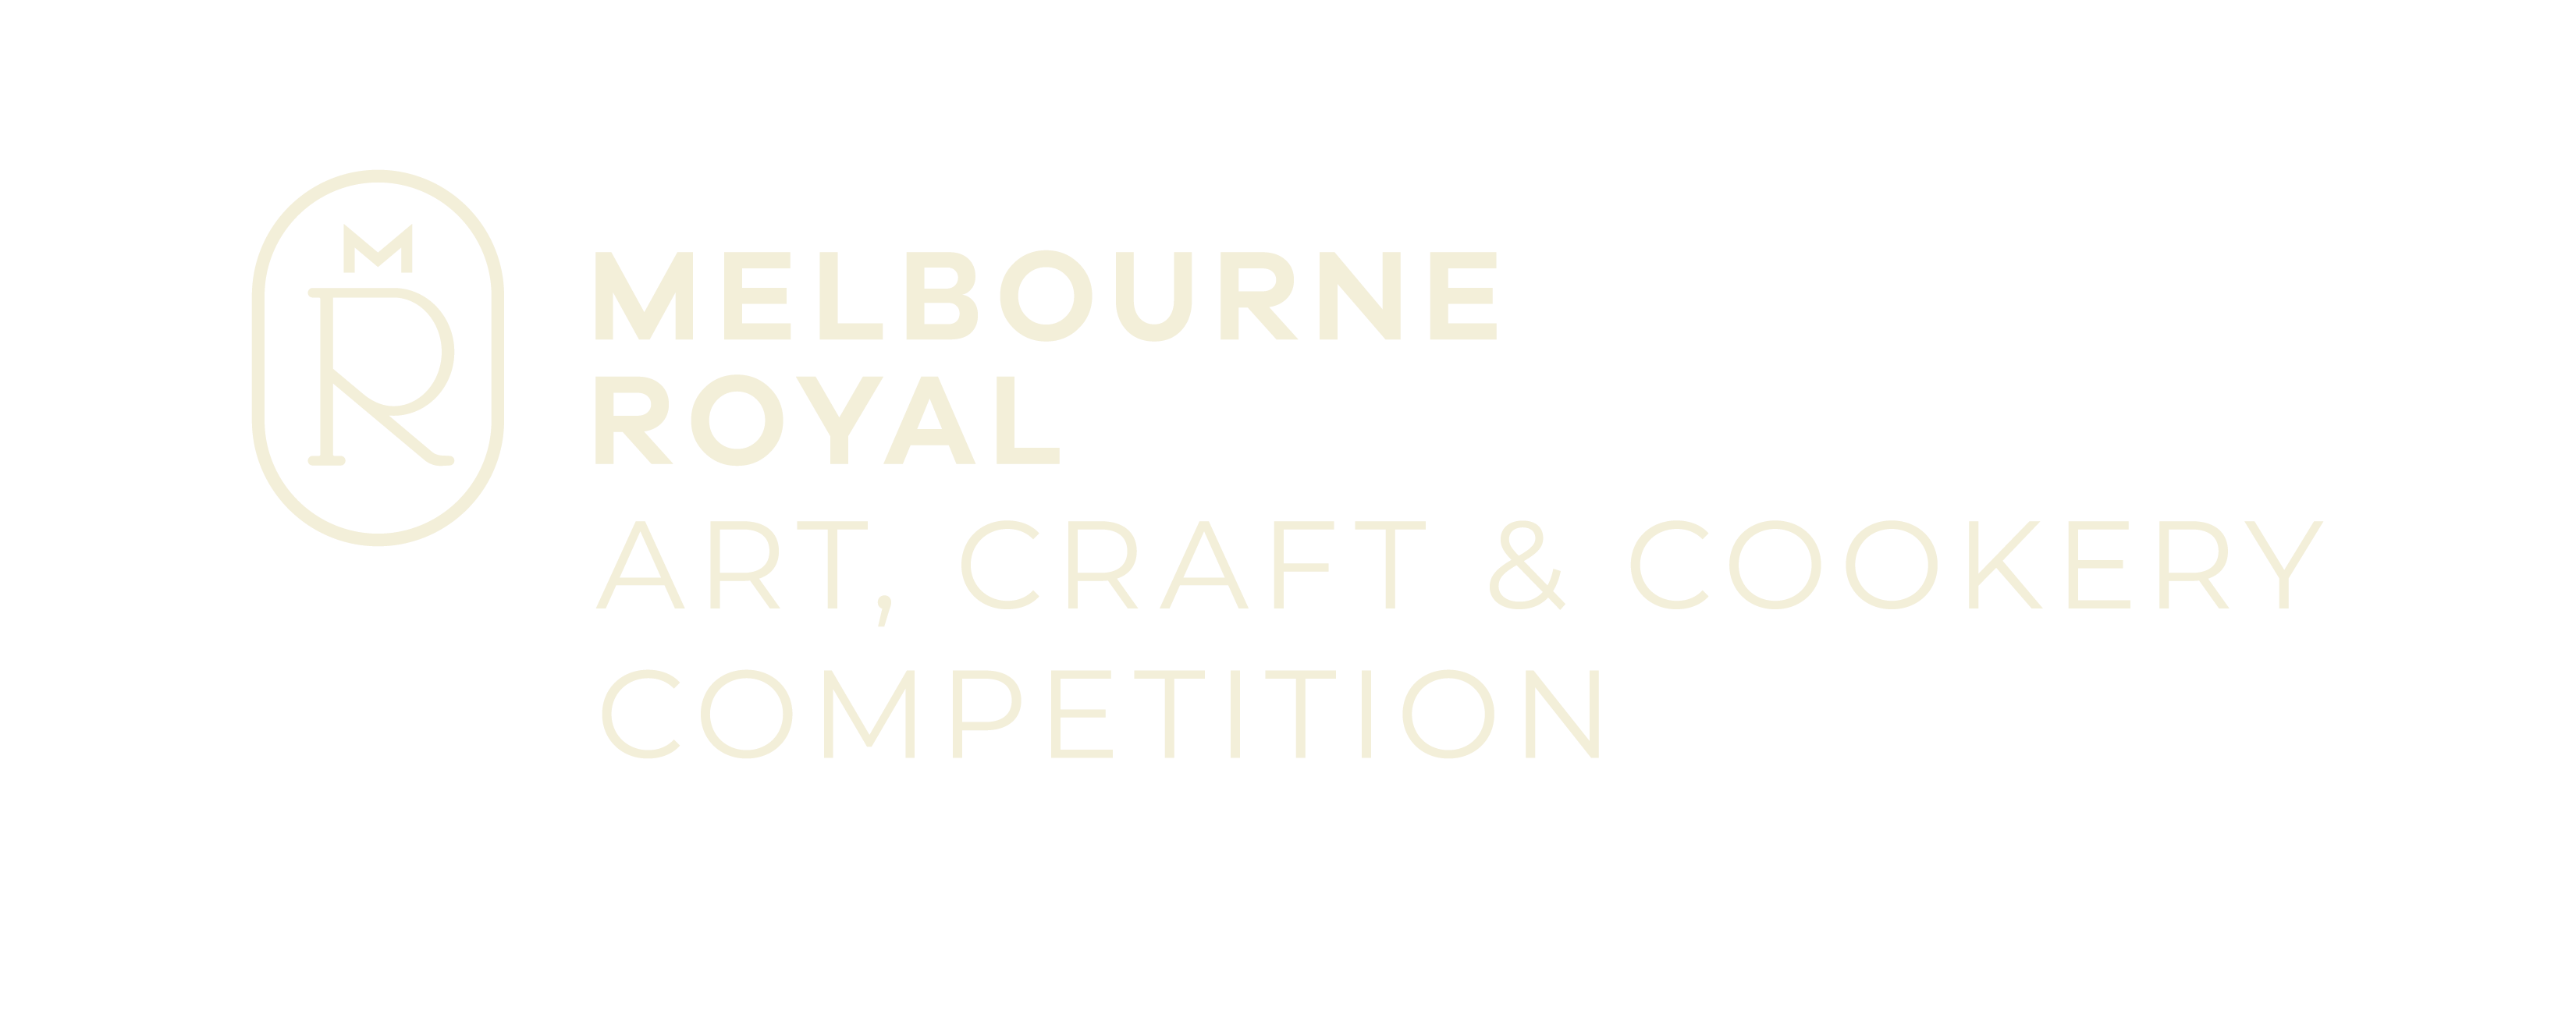 Melbourne Royal| Art, Craft & Cookery Competition